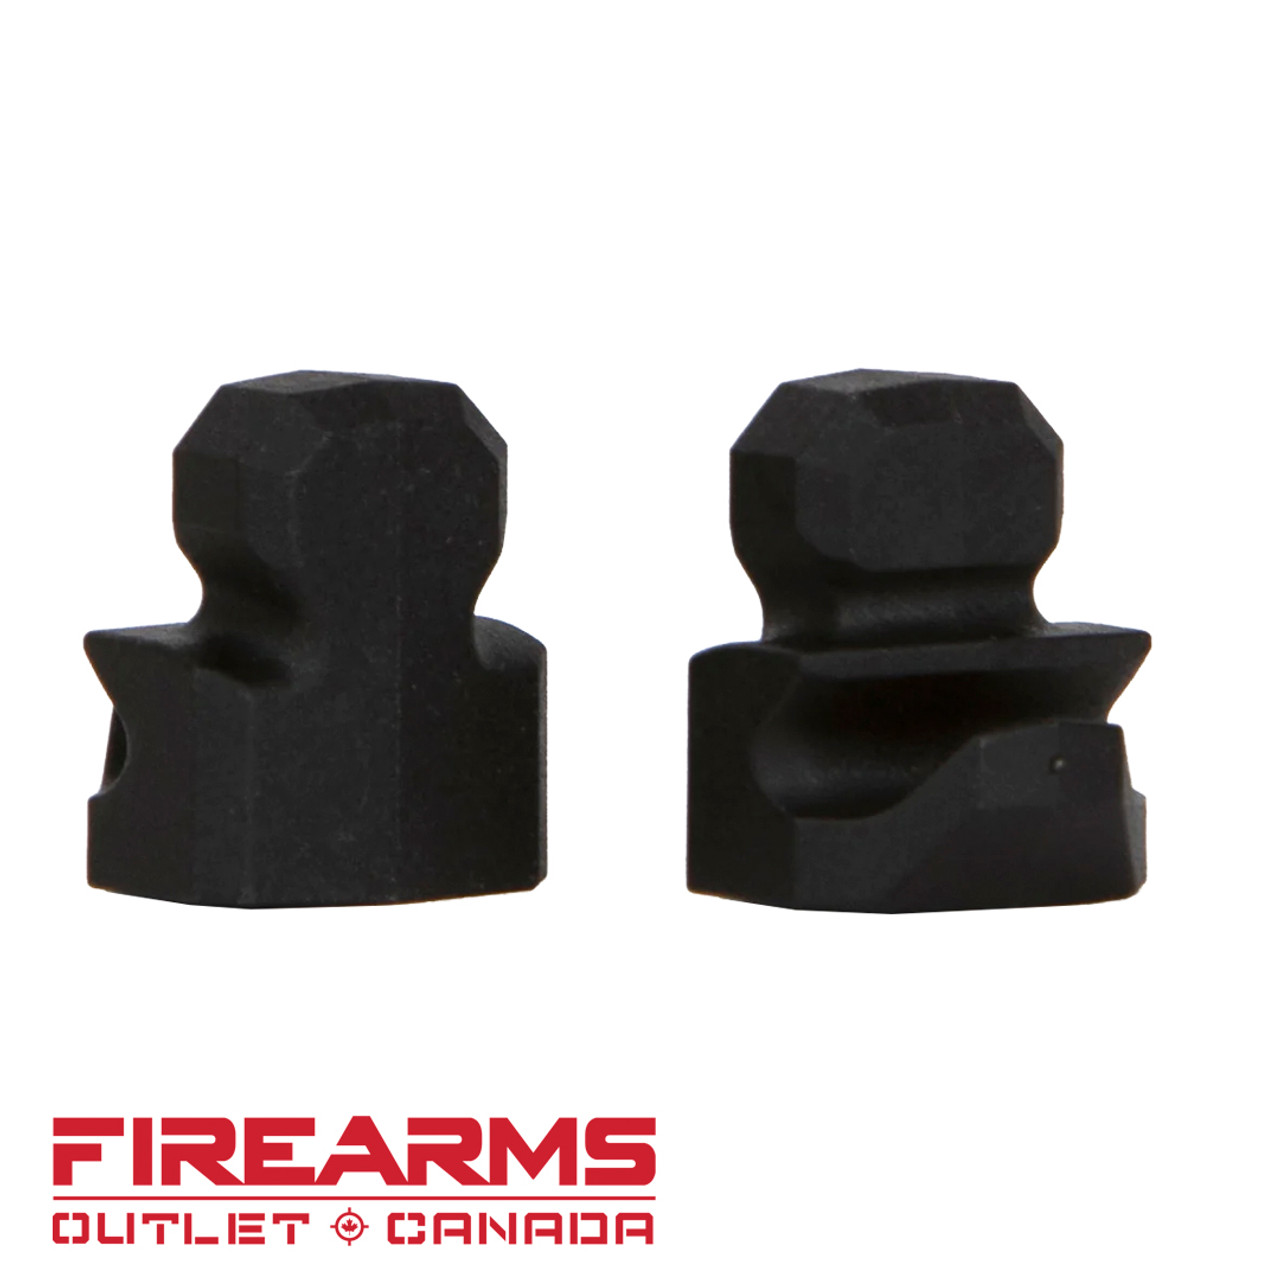 Steambow Limb Tips for AR-Series - Set of 2 [0000368]